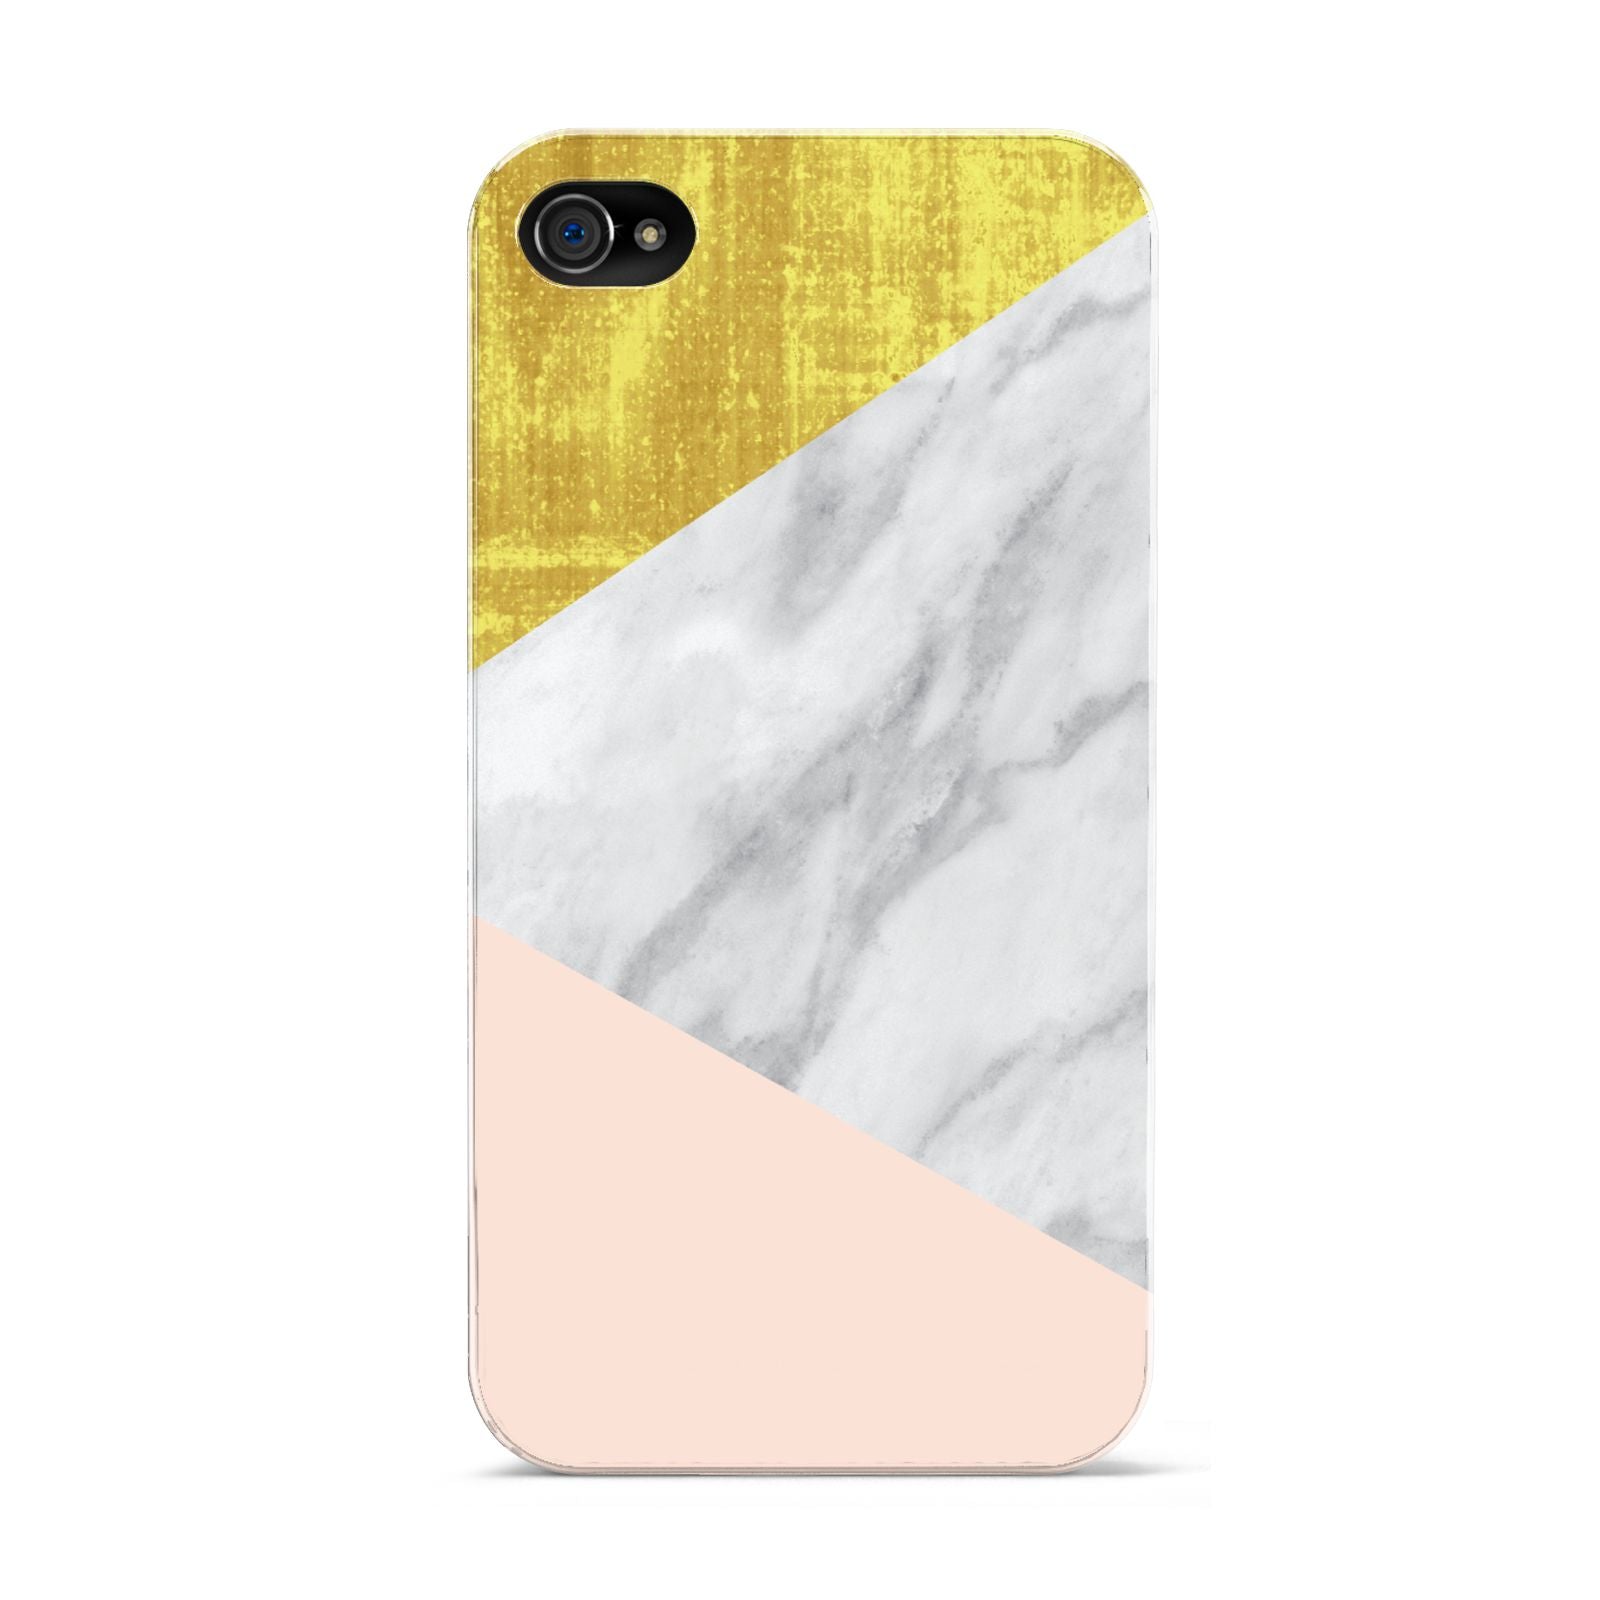 Marble White Gold Foil Peach Apple iPhone 4s Case